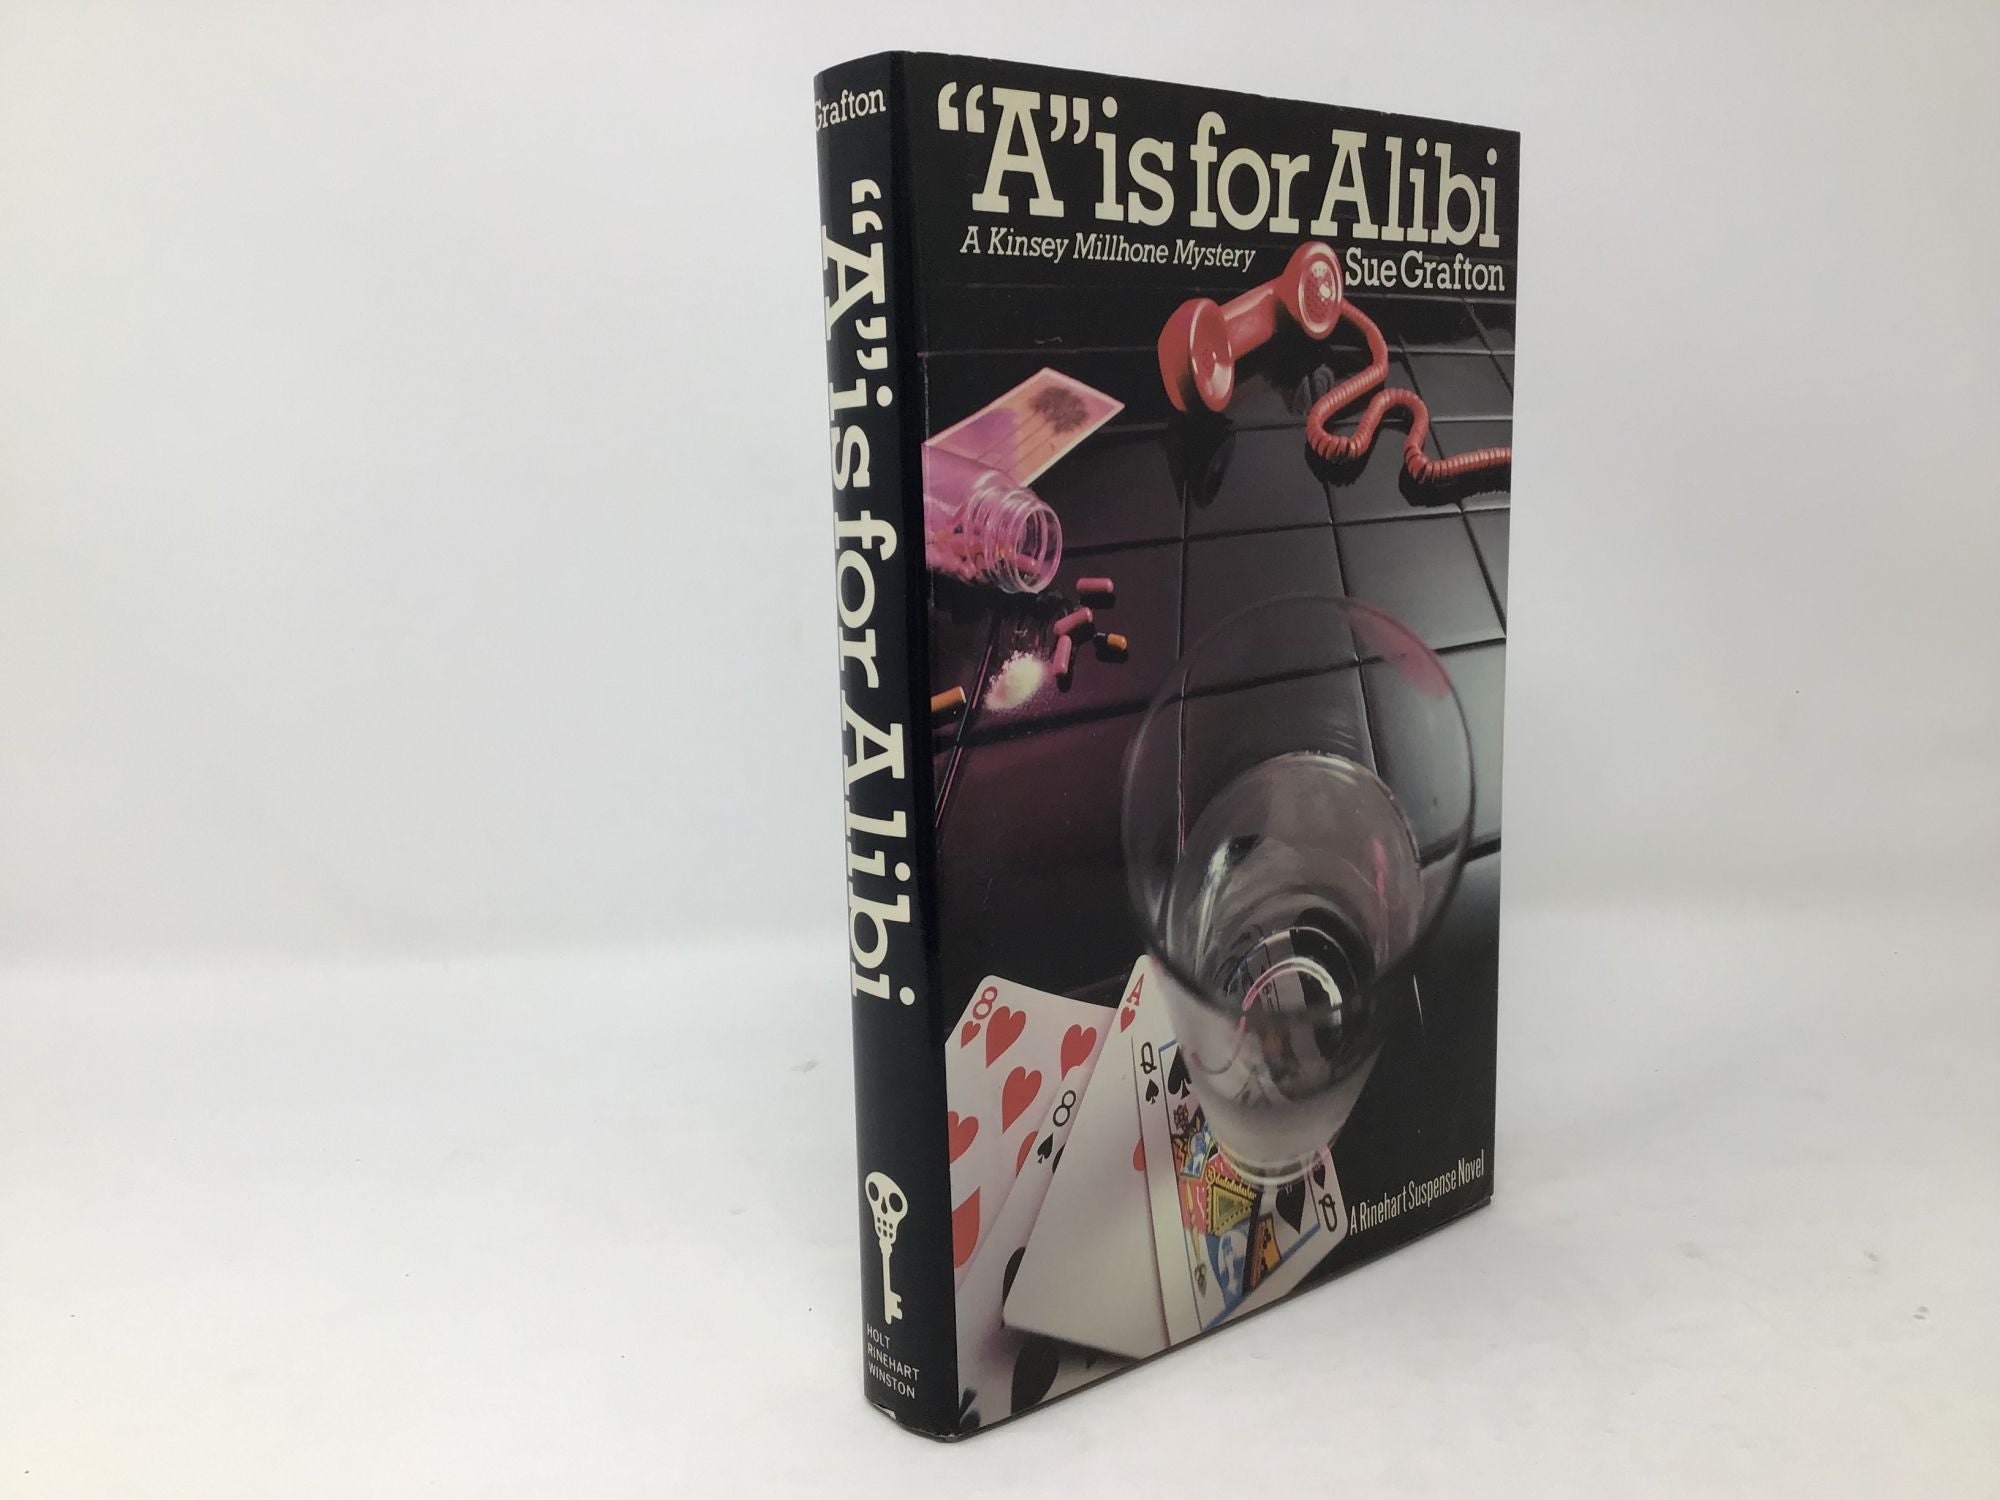 A is for Alibi by Sue Grafton on Sag Harbor Books